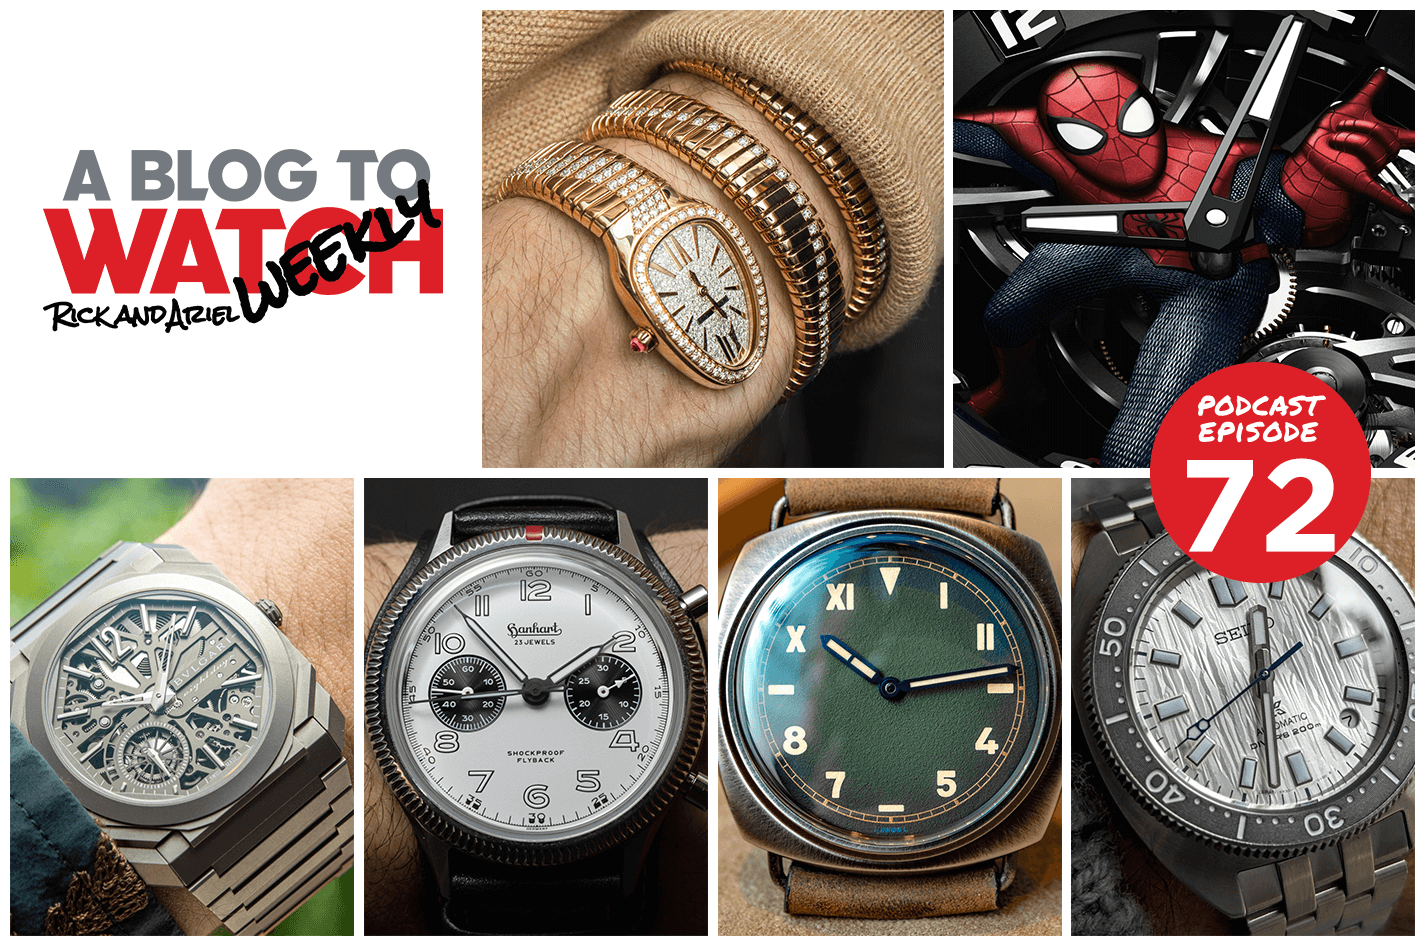 ABTWW: Thick-Wrist Woes, Sick Aliens, And A Spidey-Watch | aBlogtoWatch